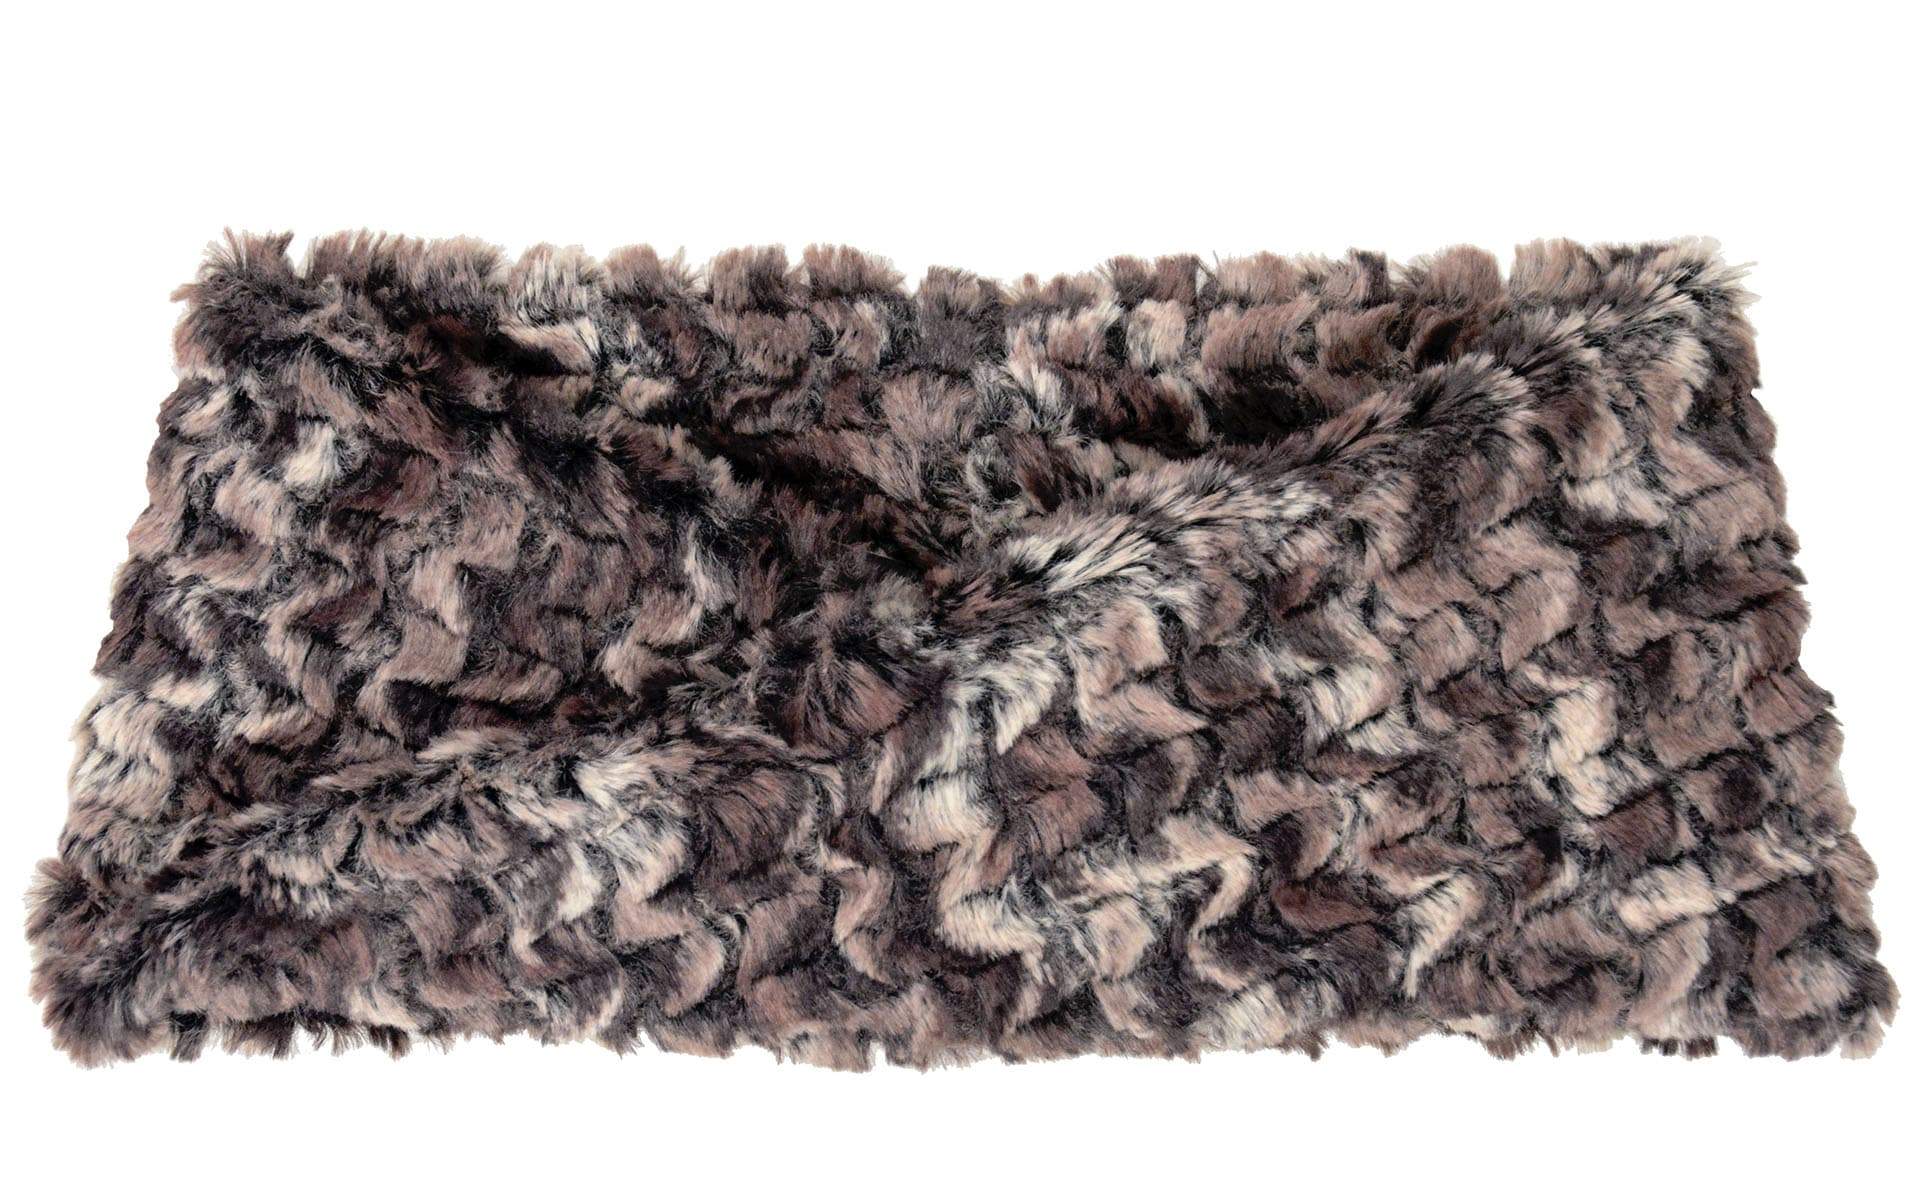 Product shot of Headband, Ear and Neck Warmer with feather trim | Calico, brown, chocolate and Ivory Faux Fur | Handmade by Pandemonium Millinery Seattle, WA USA